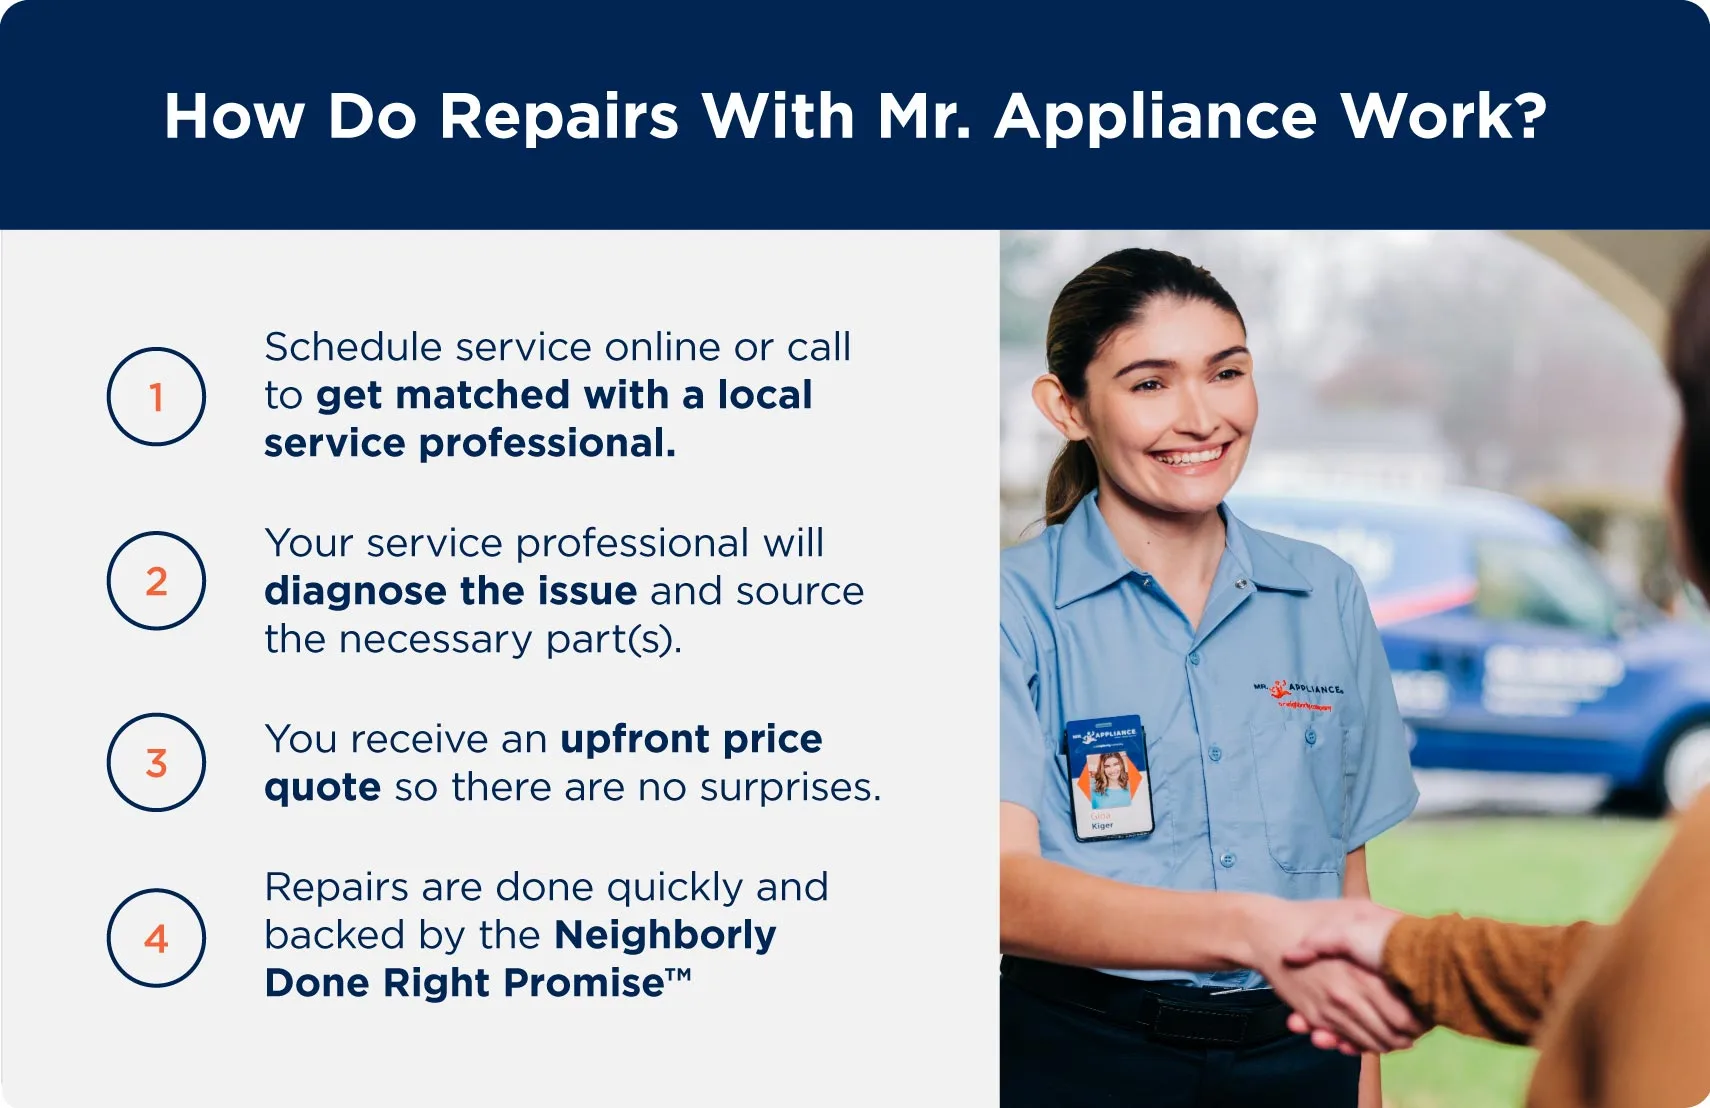 How Sub-Zero refrigerator repair services with Mr. Appliance work: schedule service online, your service professional will diagnose the issue, you receive an upfront price quote, and repairs are done quickly.